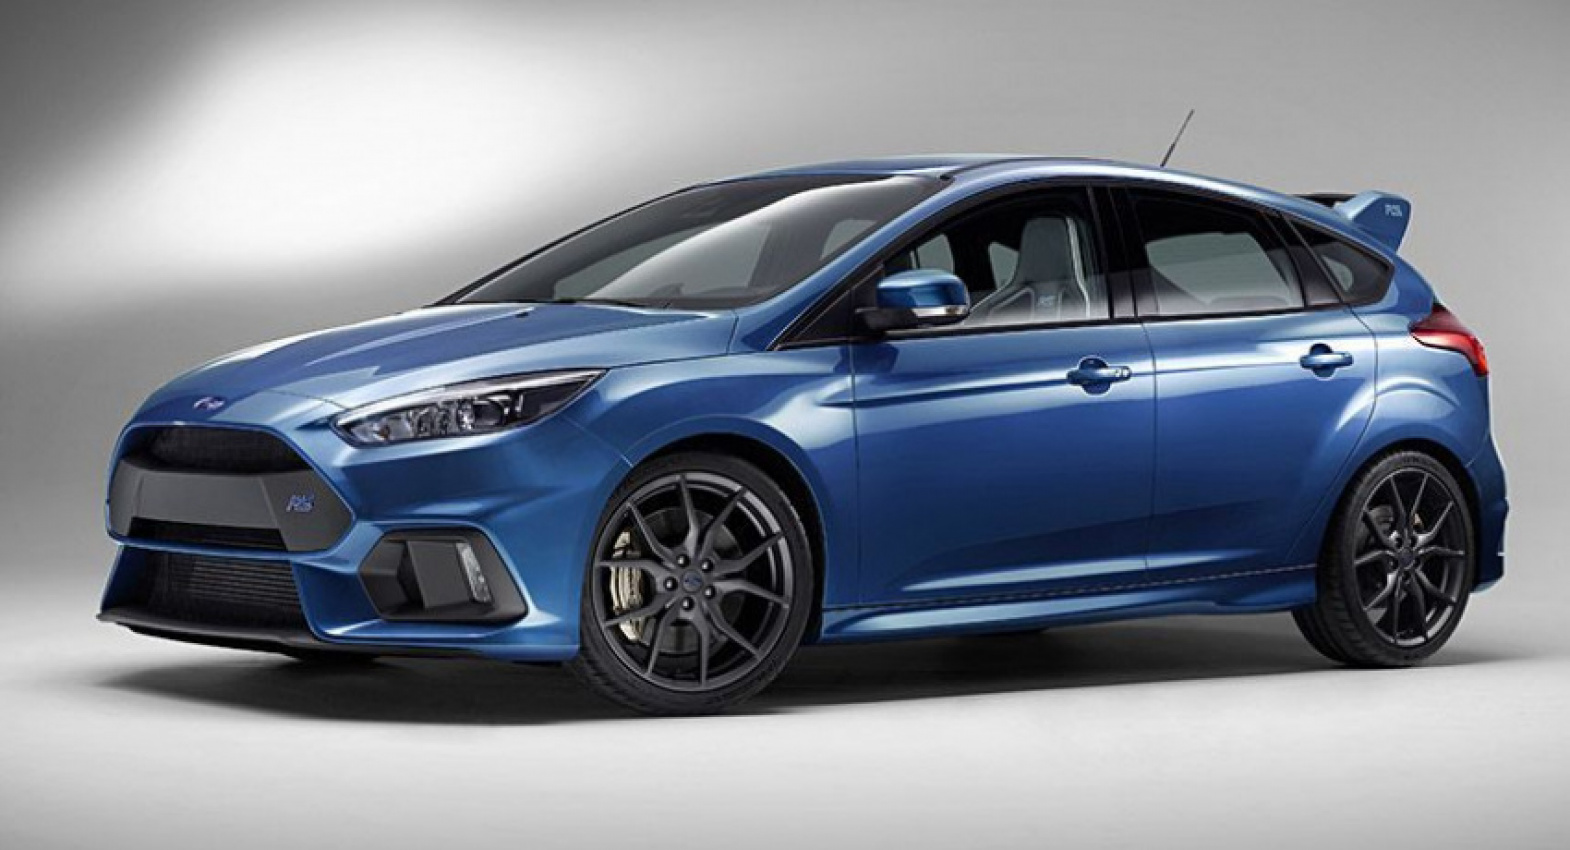 autos, cars, ford, all-new ford focus rs, auto news, ford focus, ford focus rs, all-new ford focus rs performance figures revealed: 0-100 km/h in 4.7 seconds, 266 km/h top speed